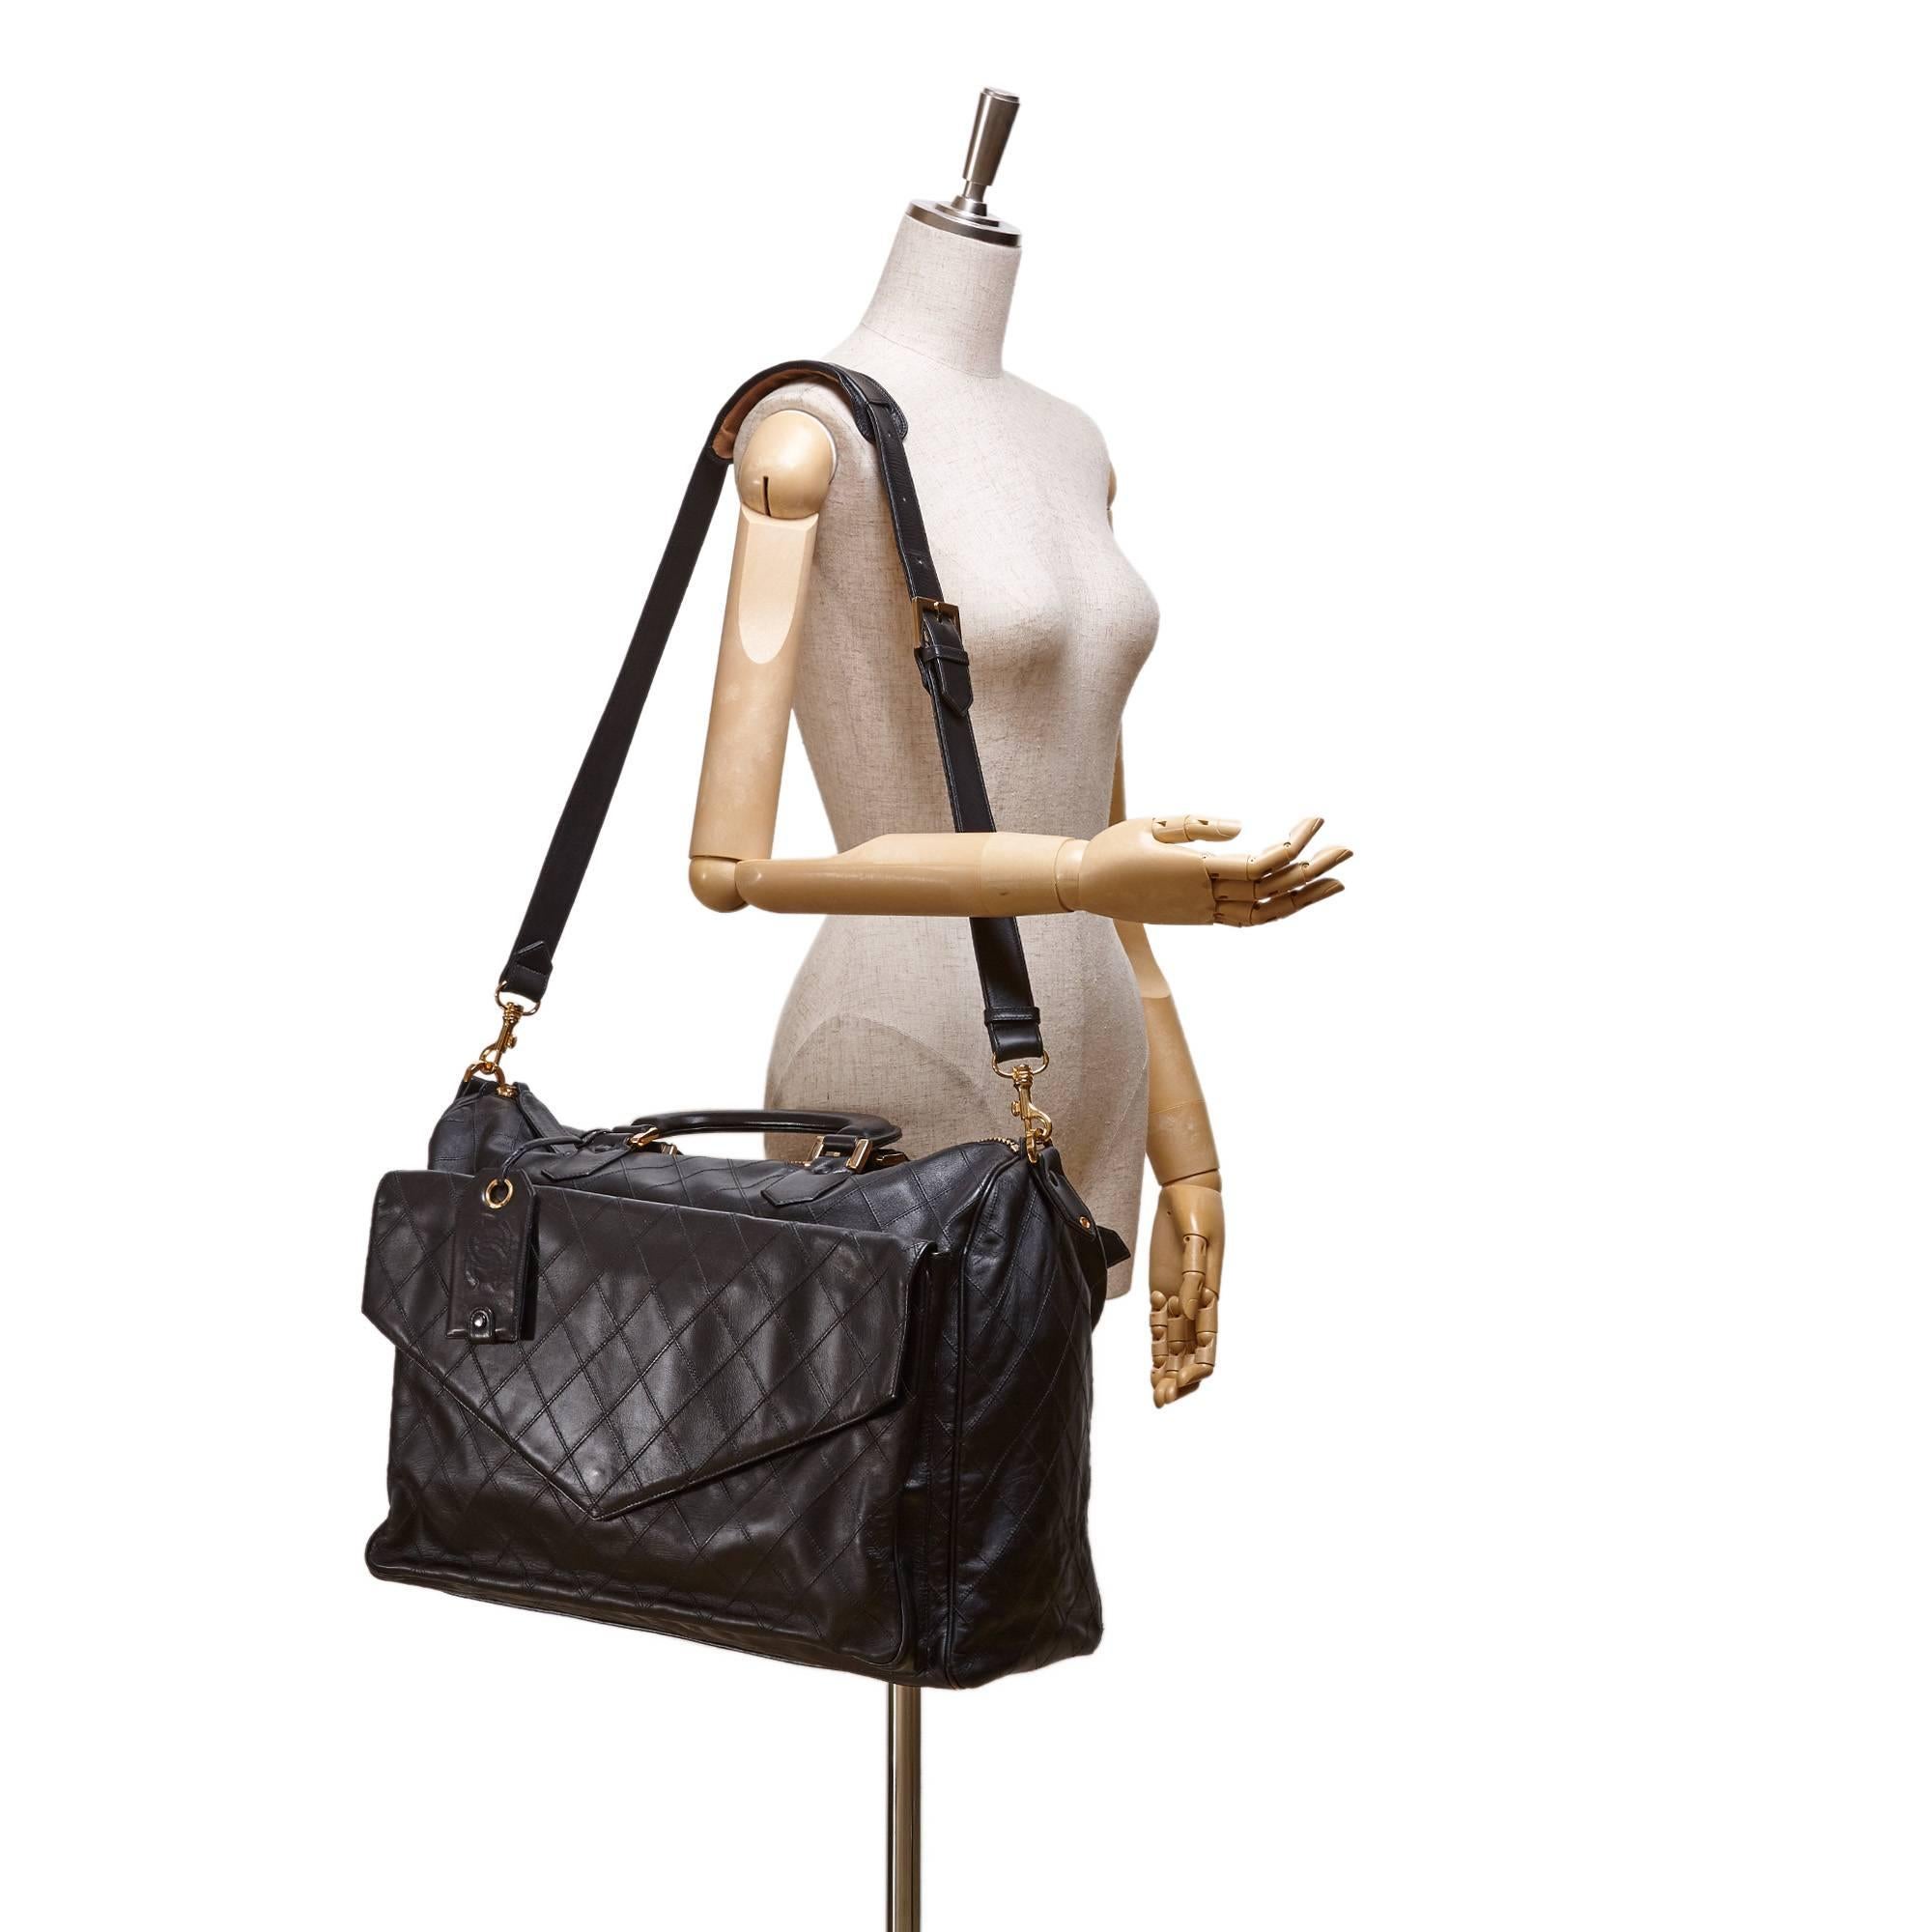 - This vintage 90s black Metelasse shoulder duffel bag features a leather body, exterior front flap pocket, exterior back zip pocket, rolled leather handles, top zip closure, and interior zip pockets.

- Made in Italy. 

- Size: 45cm x 33cm x 20cm.